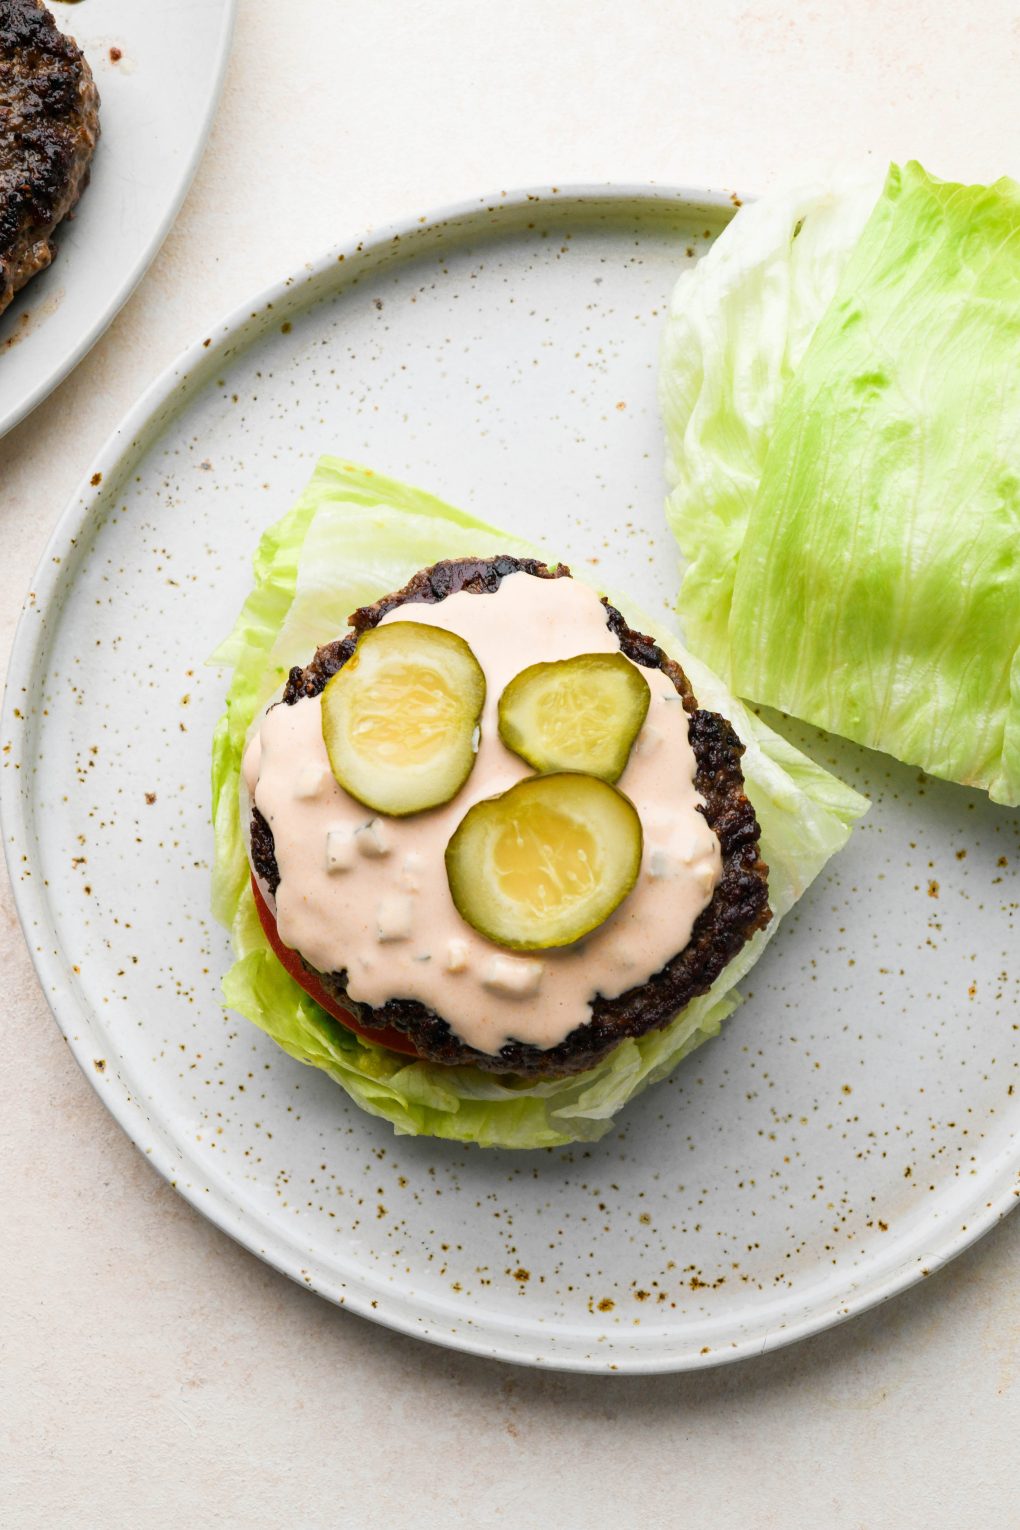 How to make a bunless lettuce wrap burger: lettuce wedges on a plate topped with smashed avocado, tomato, thinly sliced white onion, a burger patty, burger sauce, and sliced pickles.